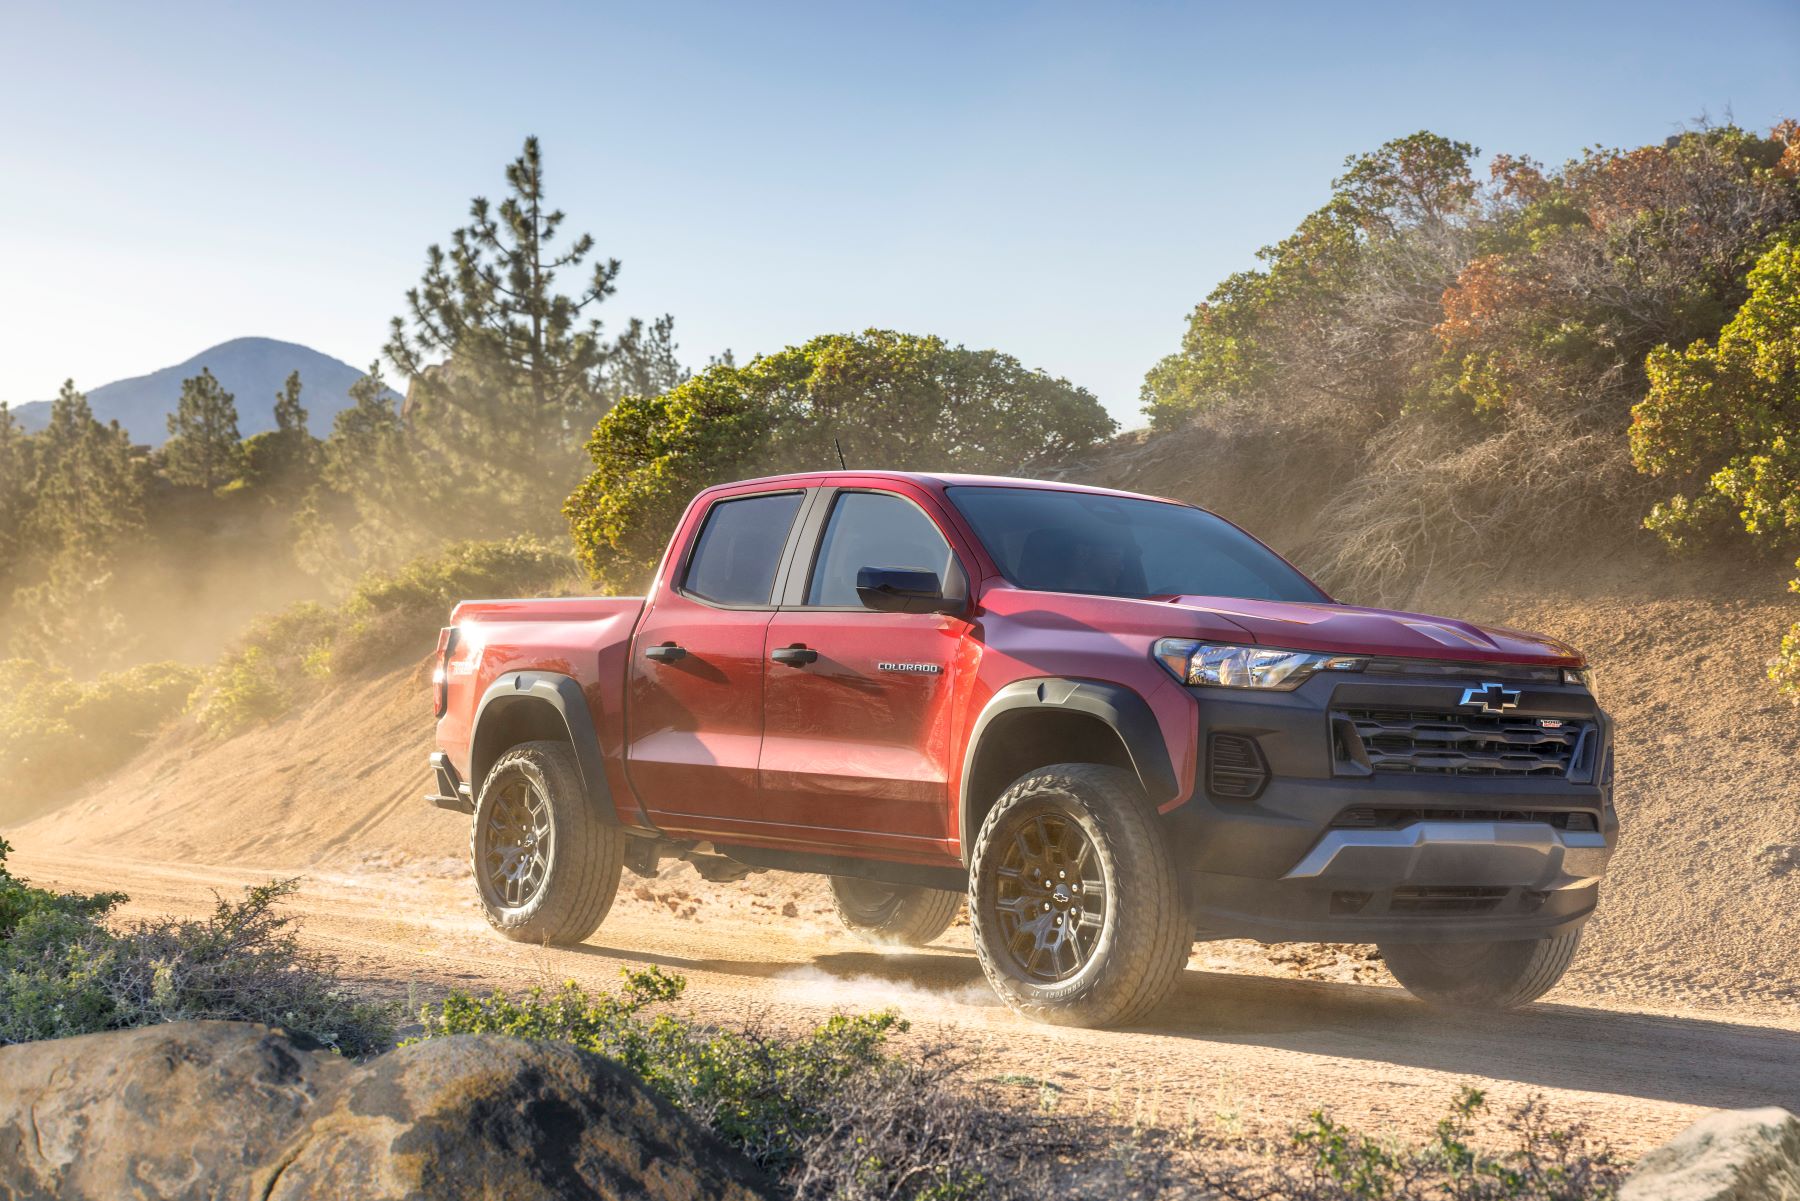 A red 2023 Chevy Colorado Trail Boss midsize pickup truck model parked on a dusty dirt trail in the desert